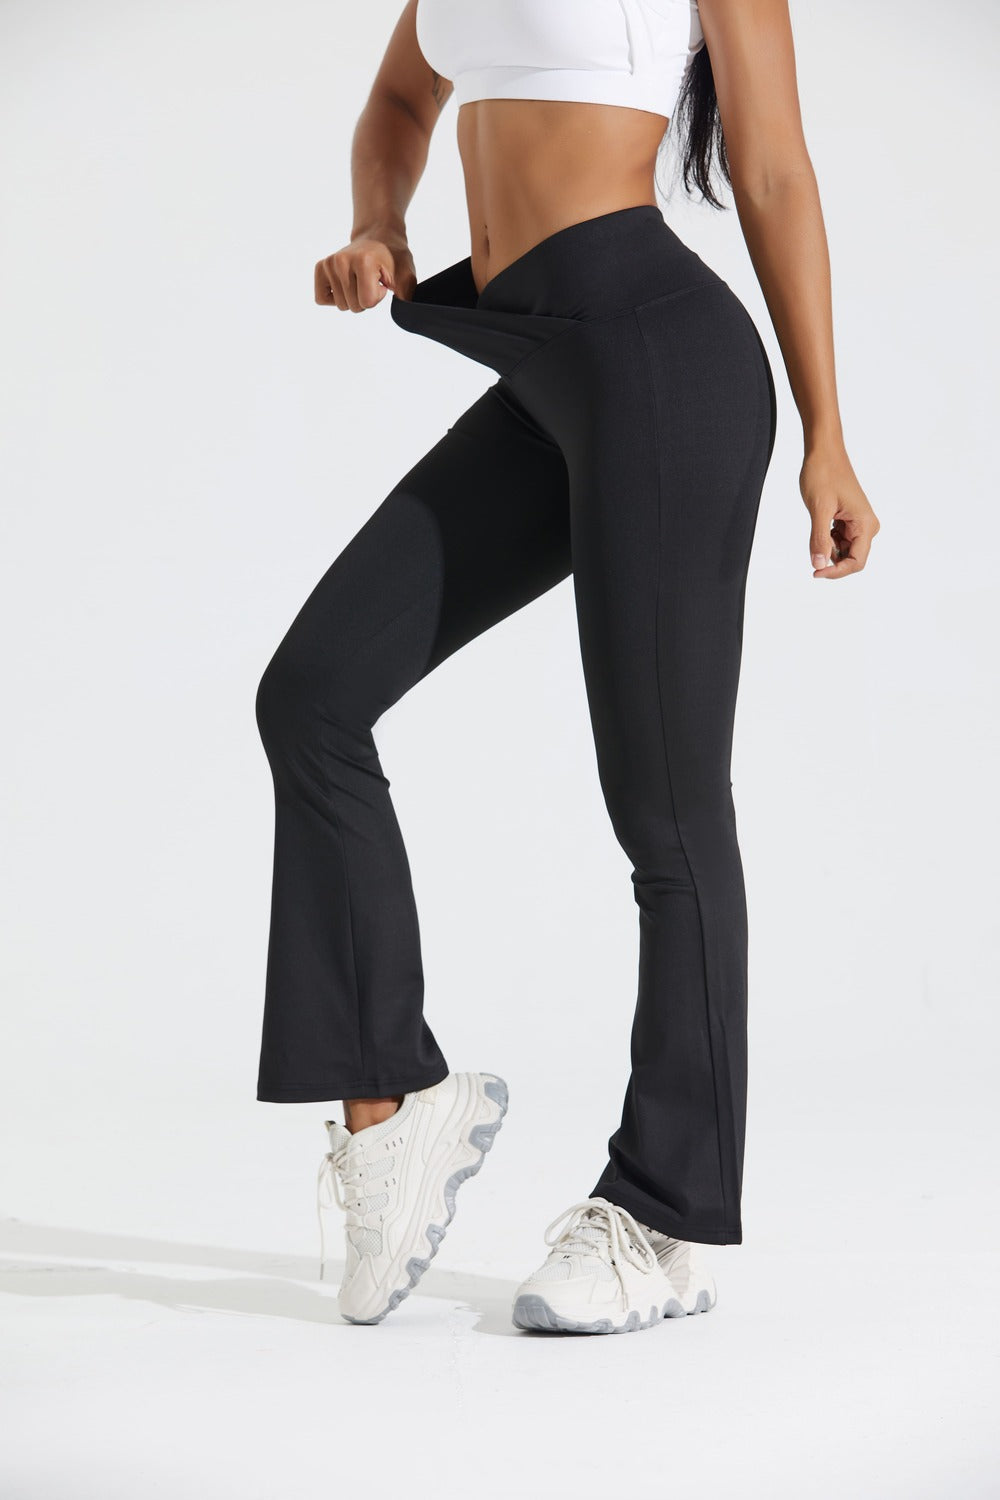 Womens Active Flare Crossover Flare Leggings For Yoga, Gym